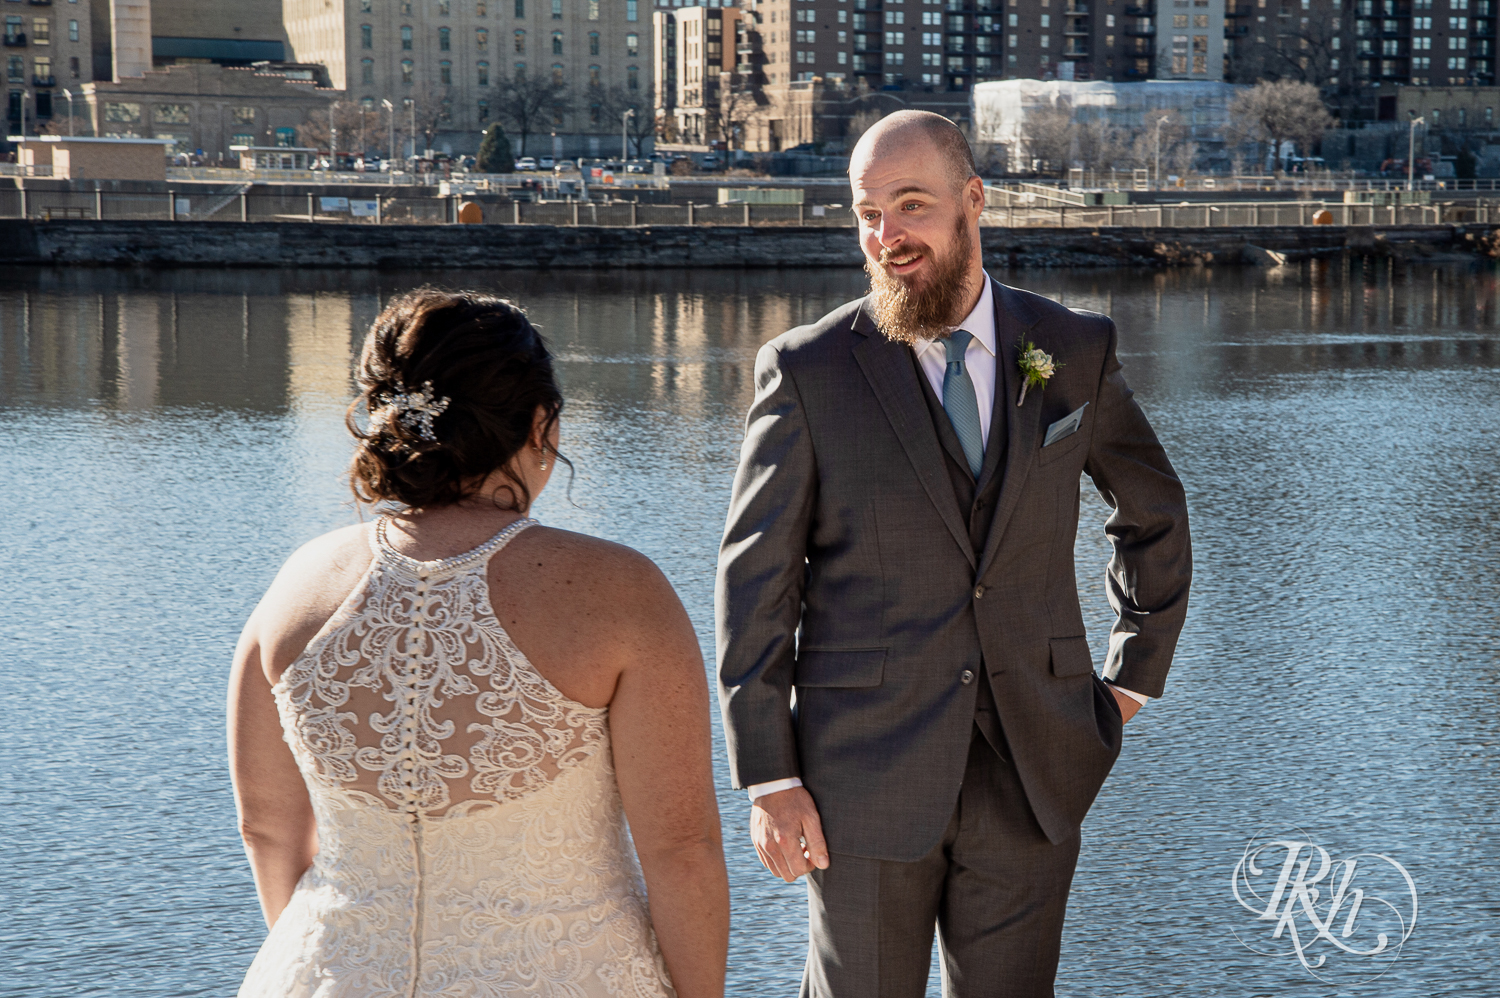 Bride and groom share first look at in front over river in Saint Anthony Main in Minneapolis, Minnesota.